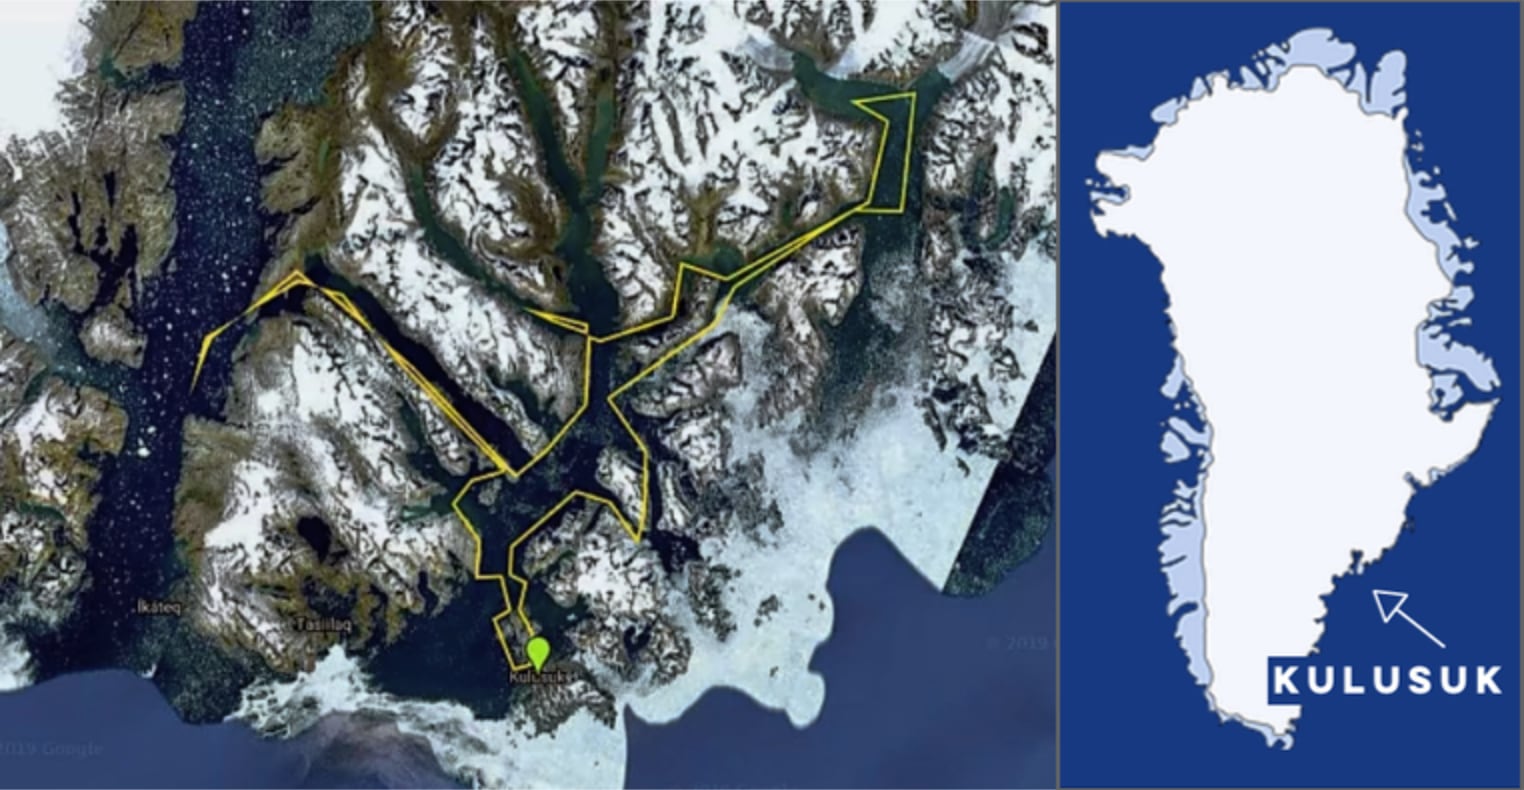 Planned route for Greenland kayak trip